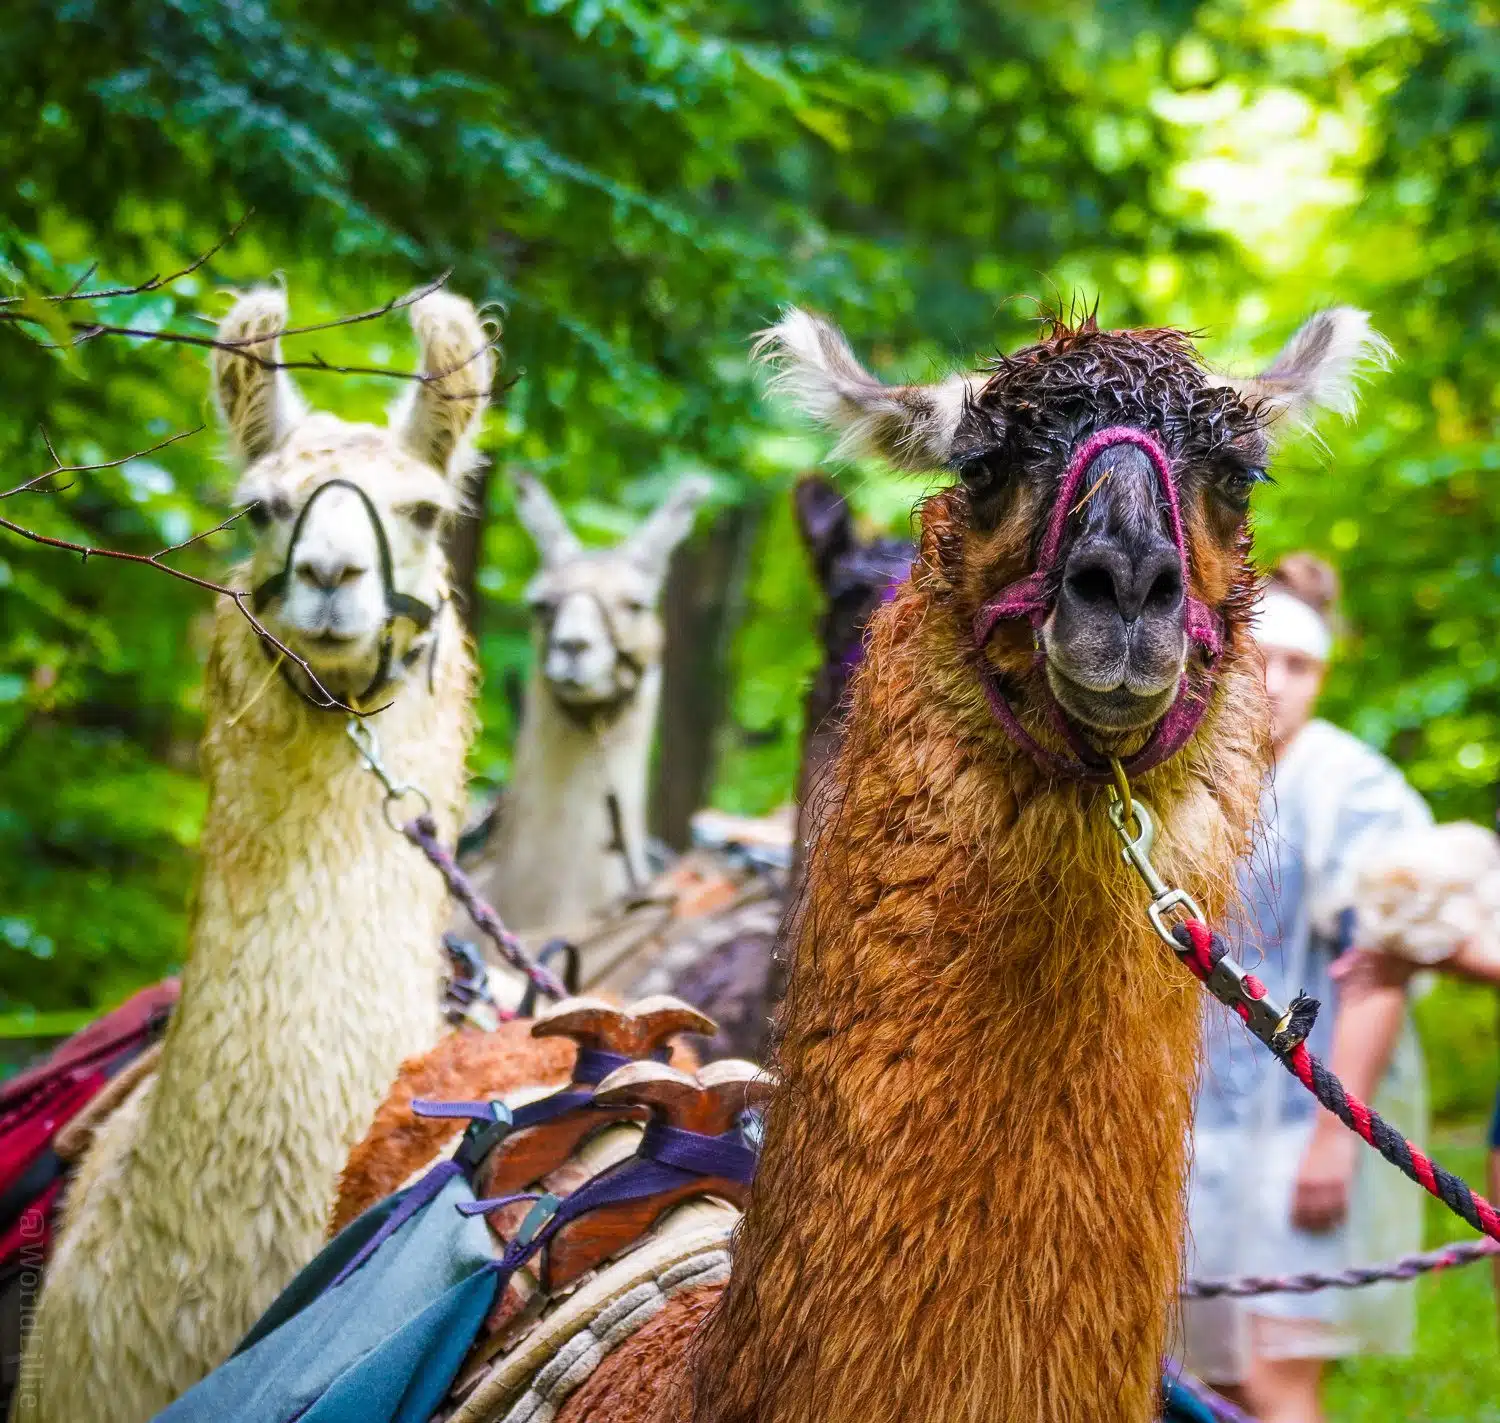 Do you want to come llama trekking with us?